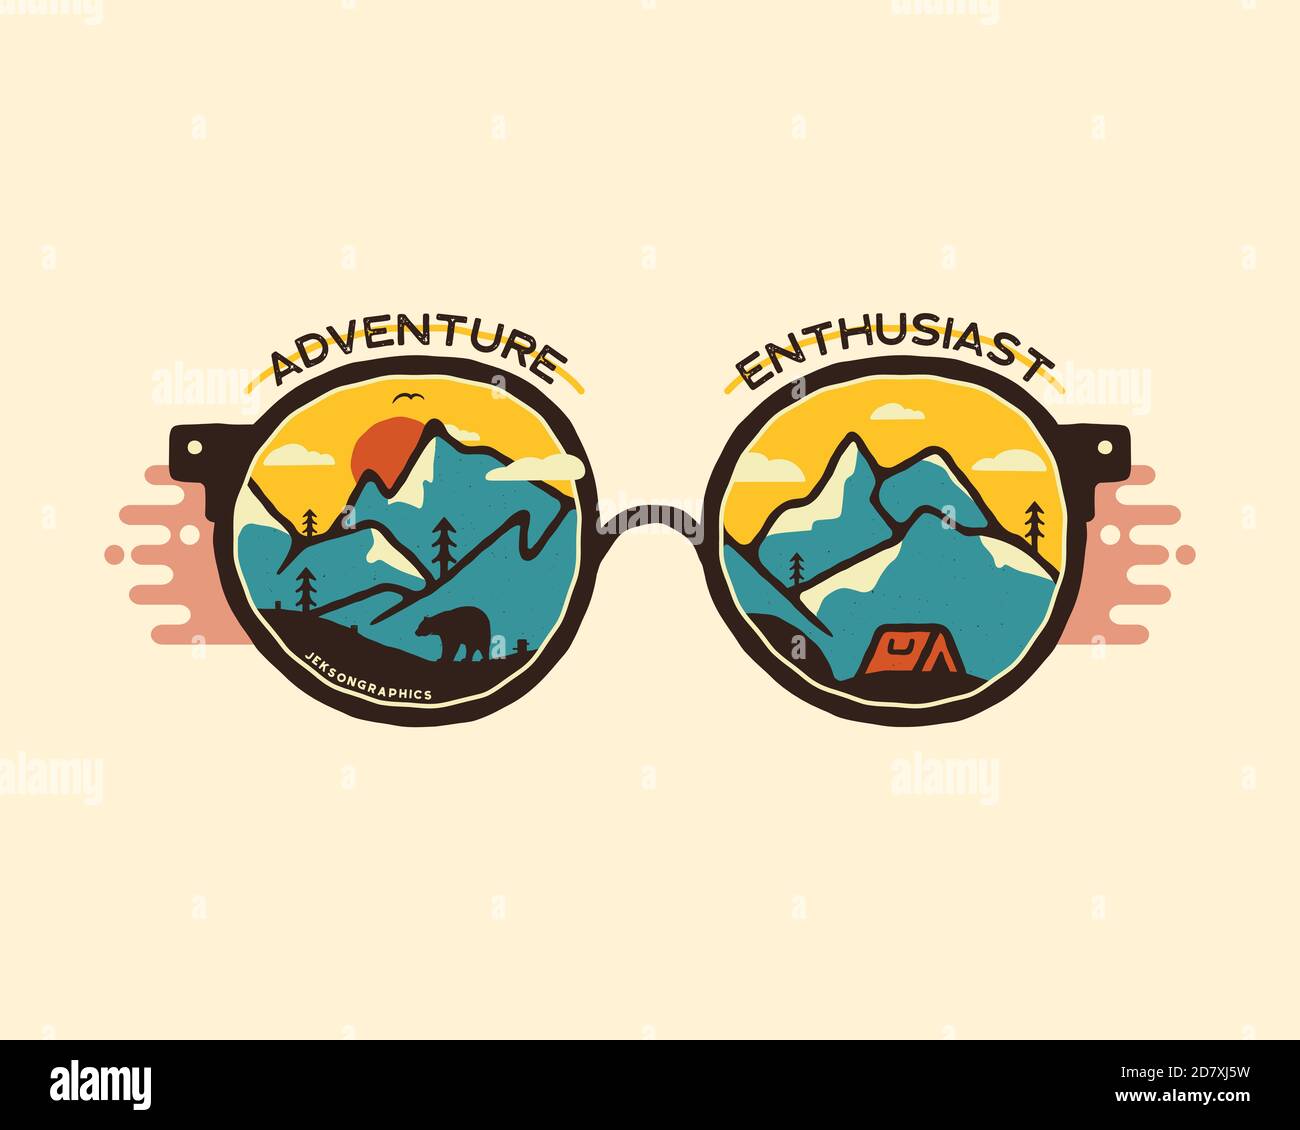 Camping badge illustration design. Outdoor logo with quote - Adventure enthusiast, for t shirt. Included retro mountains, bear and tent. Unusual Stock Photo